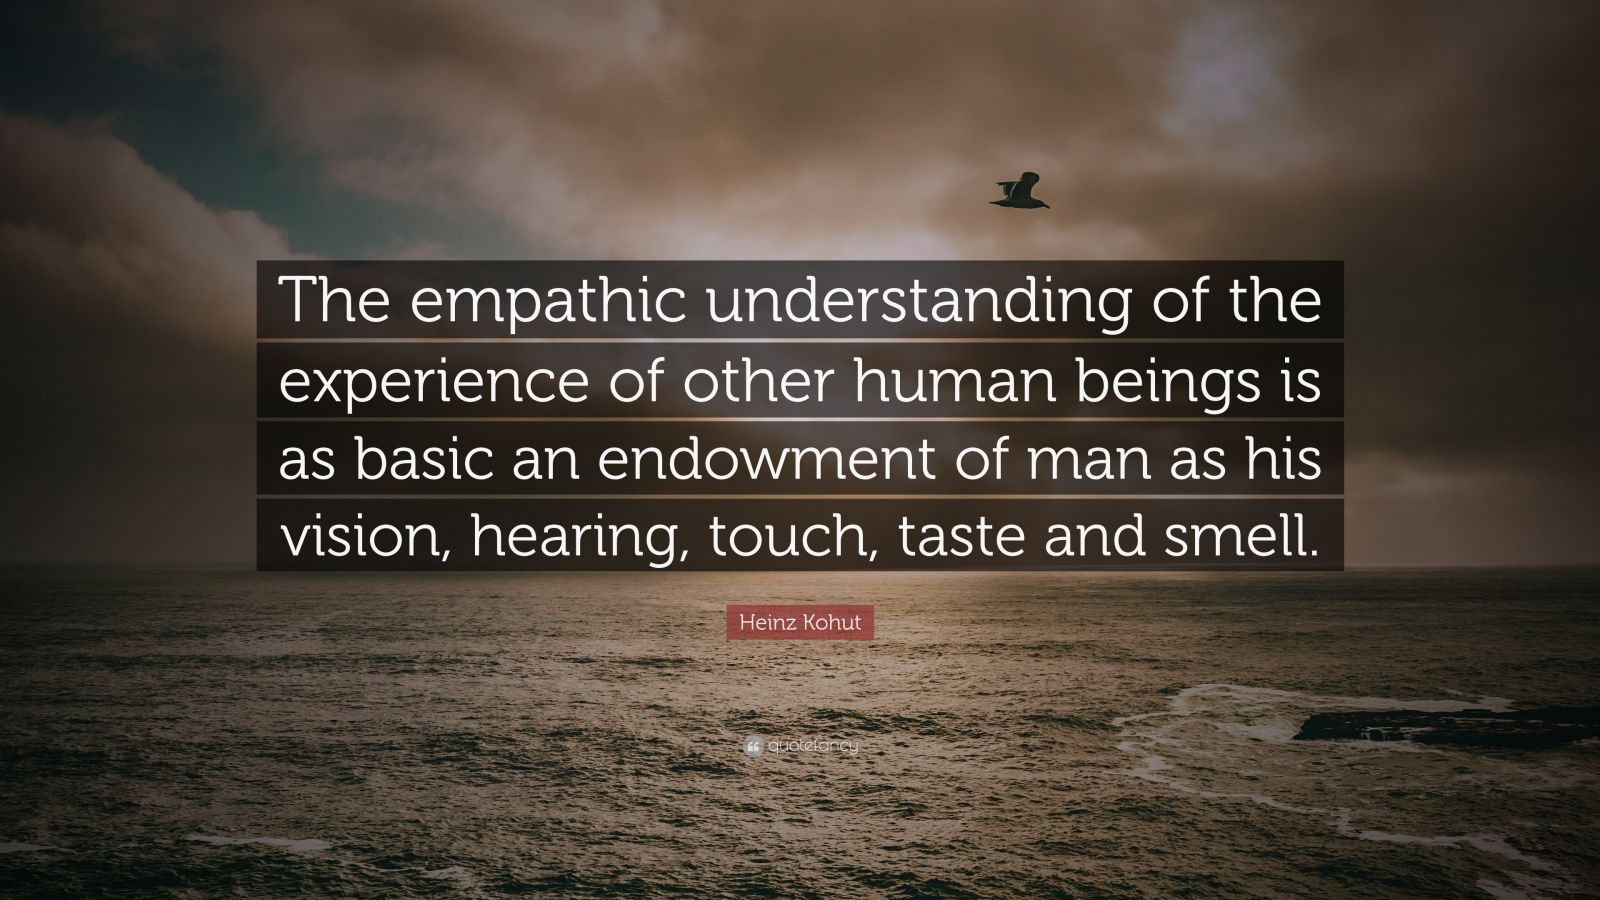 “The empathic understanding of the experience of other human beings is as basic an endowment of man as his vision, hearing, touch, taste and smell.”